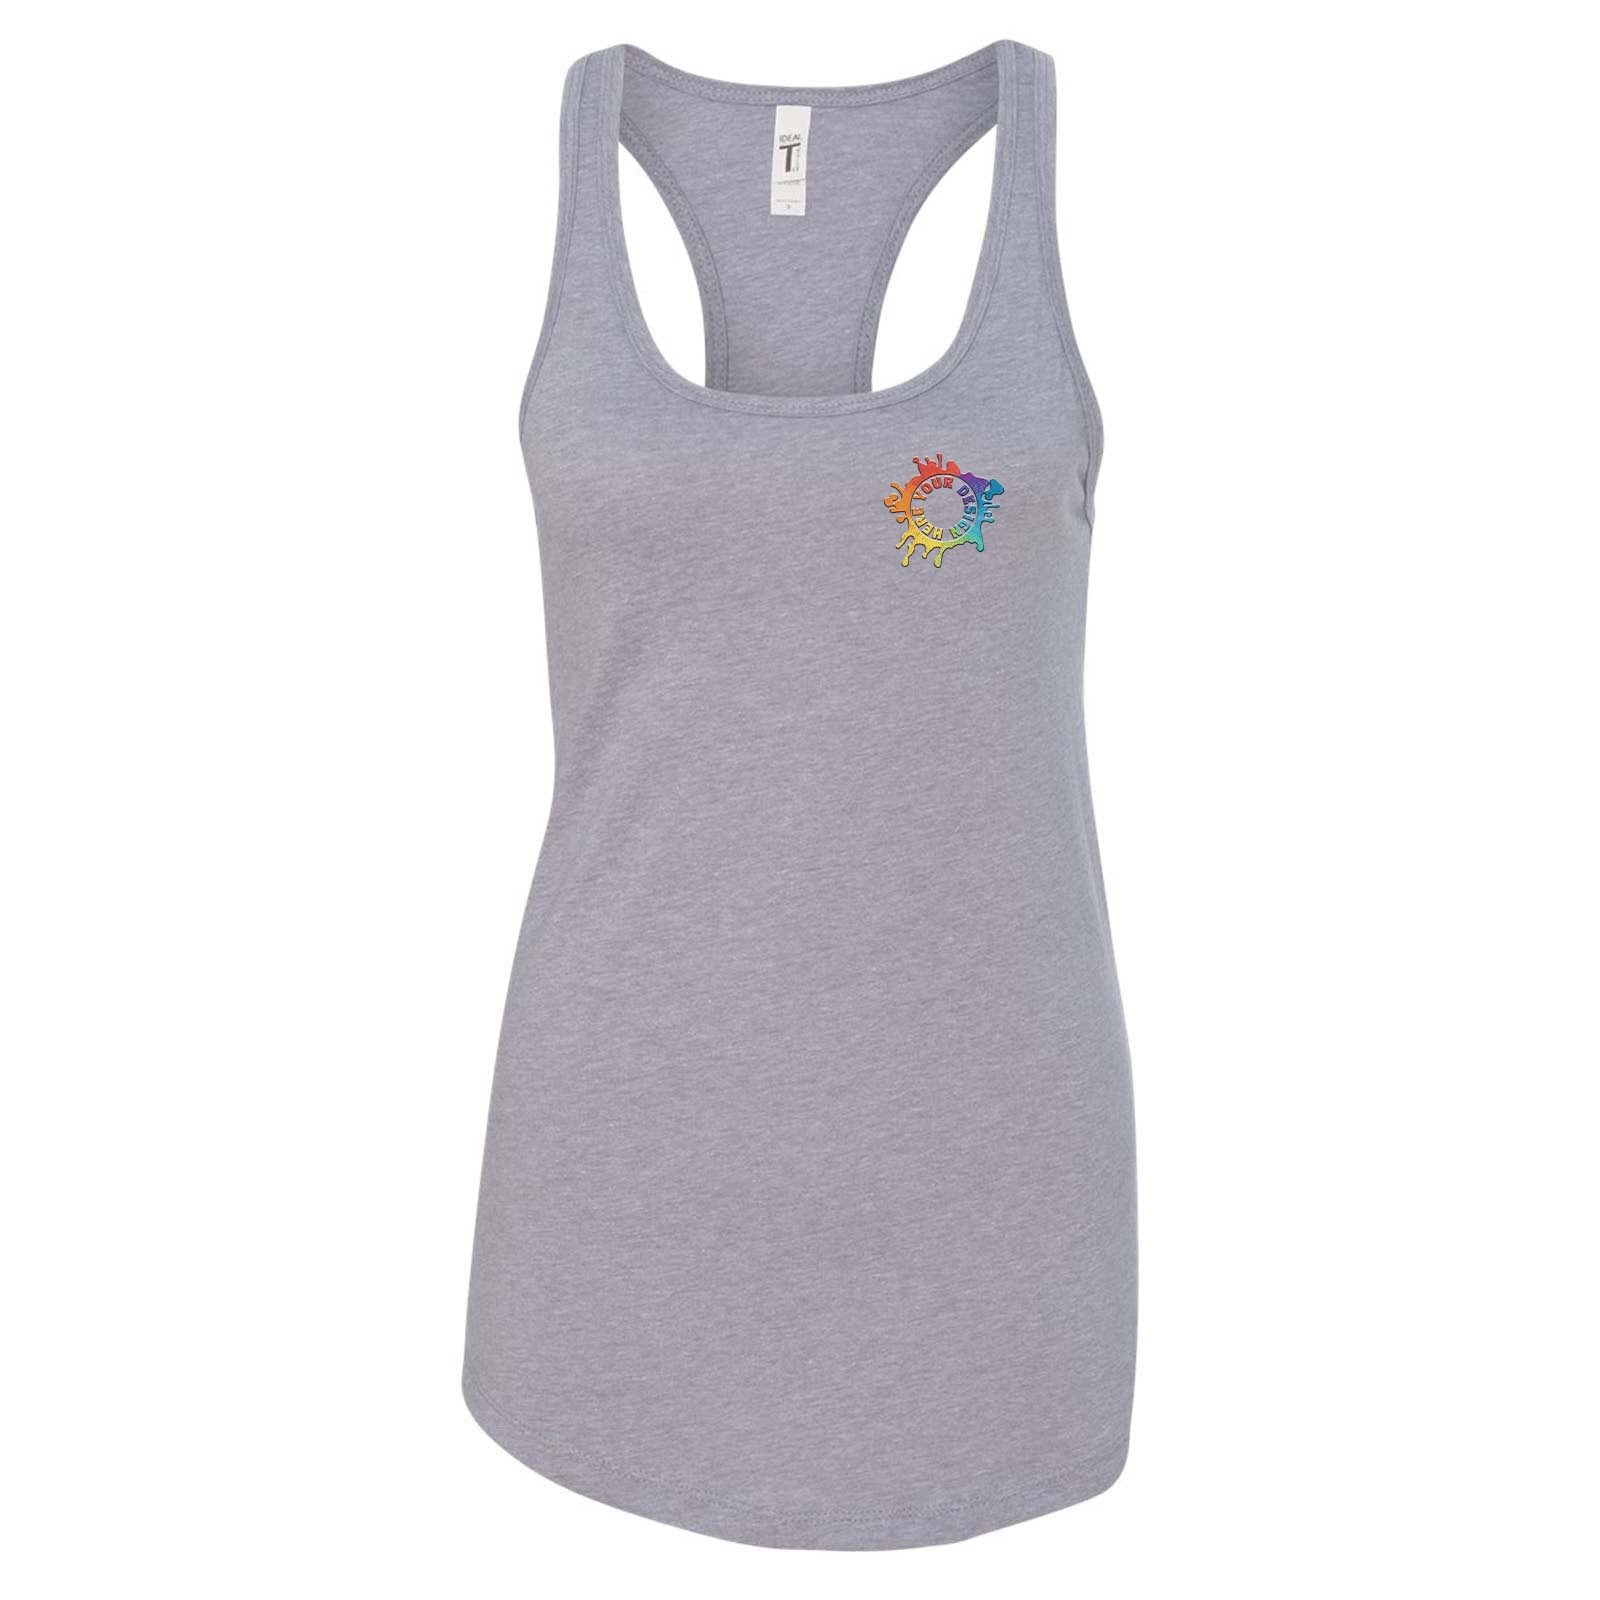 Next Level Women's Cotton/Polyester Blend Racerback Tank Top Embroidery - Mato & Hash